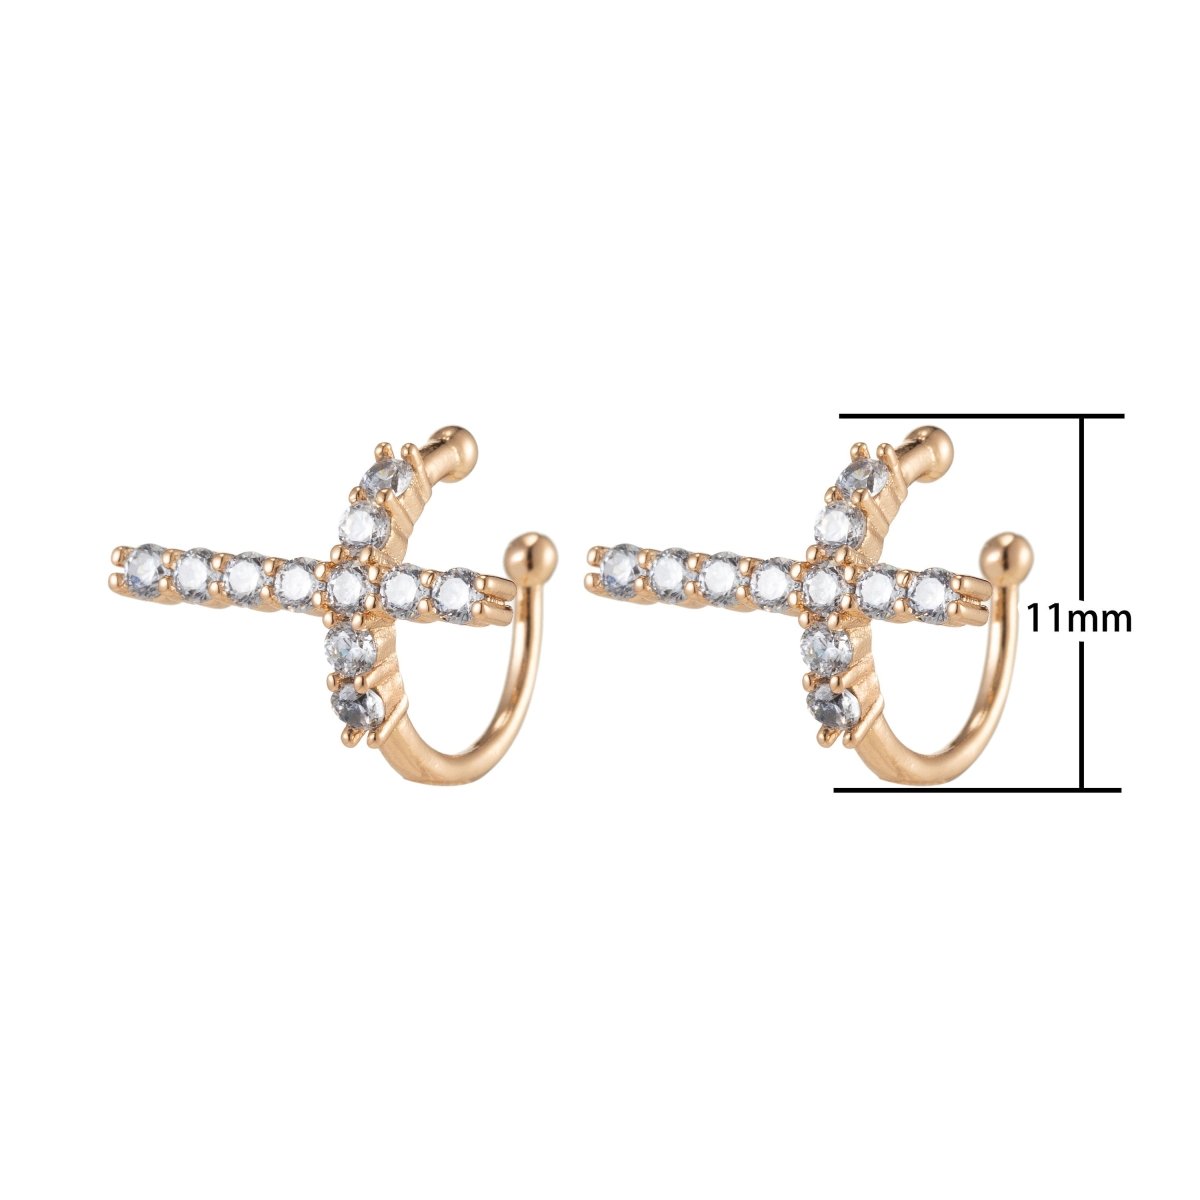 1x Dainty Cross Ear Cuffs for Non Pierced Ears Micro Pave Crystal Gold Clip on Conch Cuff Earrings for Women Girls AI-048 - DLUXCA